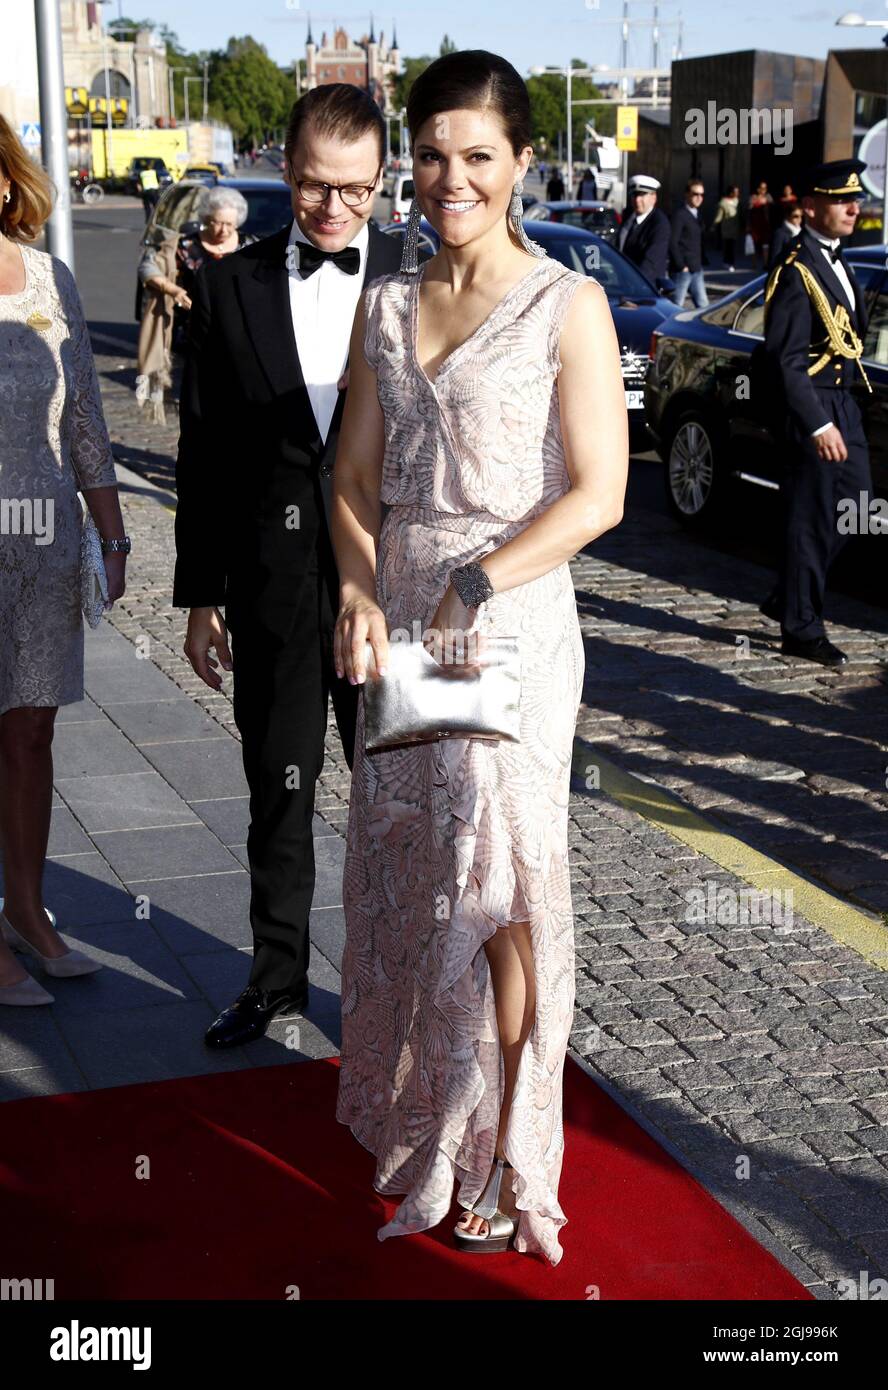 STOCKHOLM 2015-06-09 Crown Princess Victoria and Prince Daniel arrives to the Polar Music Awardwinners reception in the Grand Hotel in Stockholm, Sweden, June 9, 2015. Crown Princess chose large earrings from Oscar de la Renta. and dress 'Deborah' from House of Dagmar, Swedish design. Clutch bag from Anya Hindmarch. Foto Patrik C Osterberg / TT / kod 4571  Stock Photo